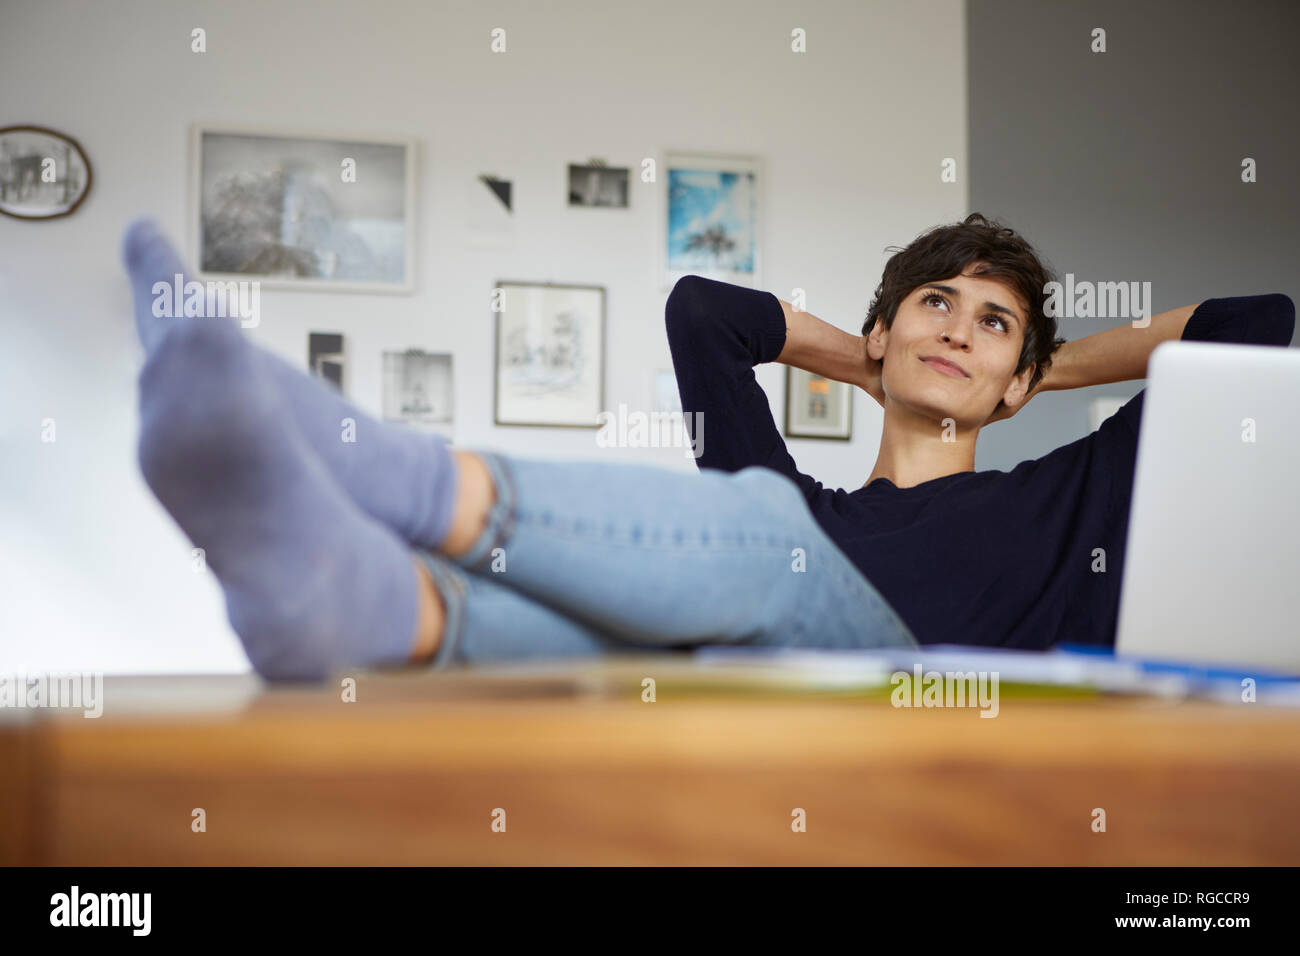 Woman at home sitting at table with laptop Stock Photo